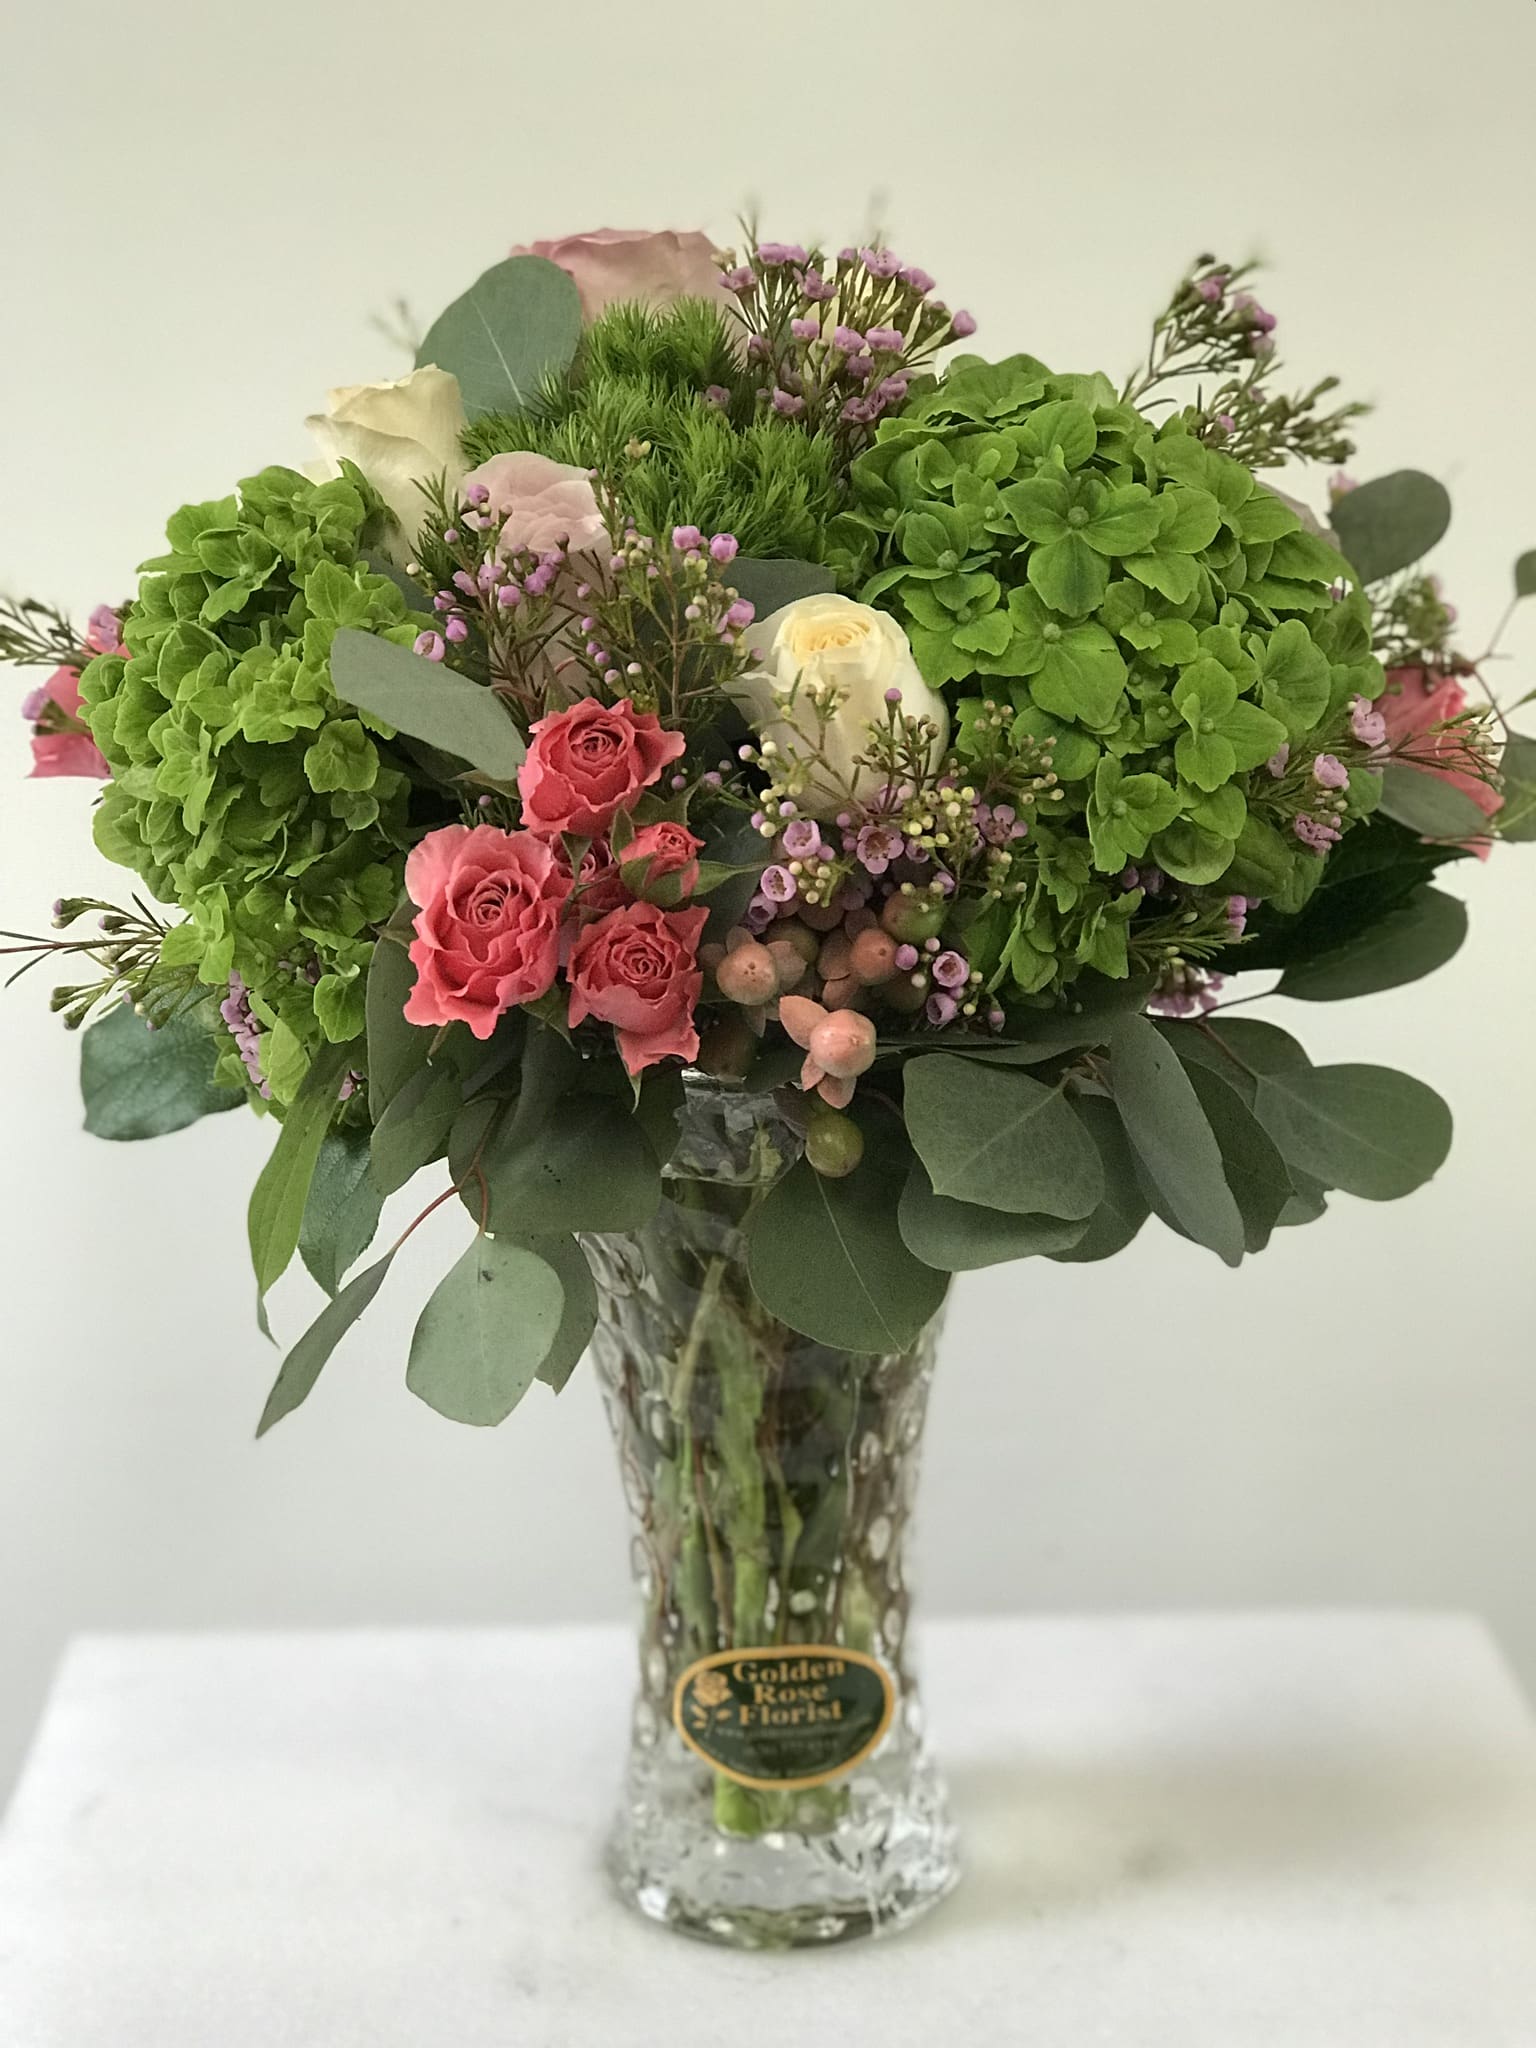 Cod 1360 - Roses, Mix Flowers  AS SIMILAR AS POSSIBLE  Substitution based on season, flowers availability or any unforeseen or uncontrollable circumstances 